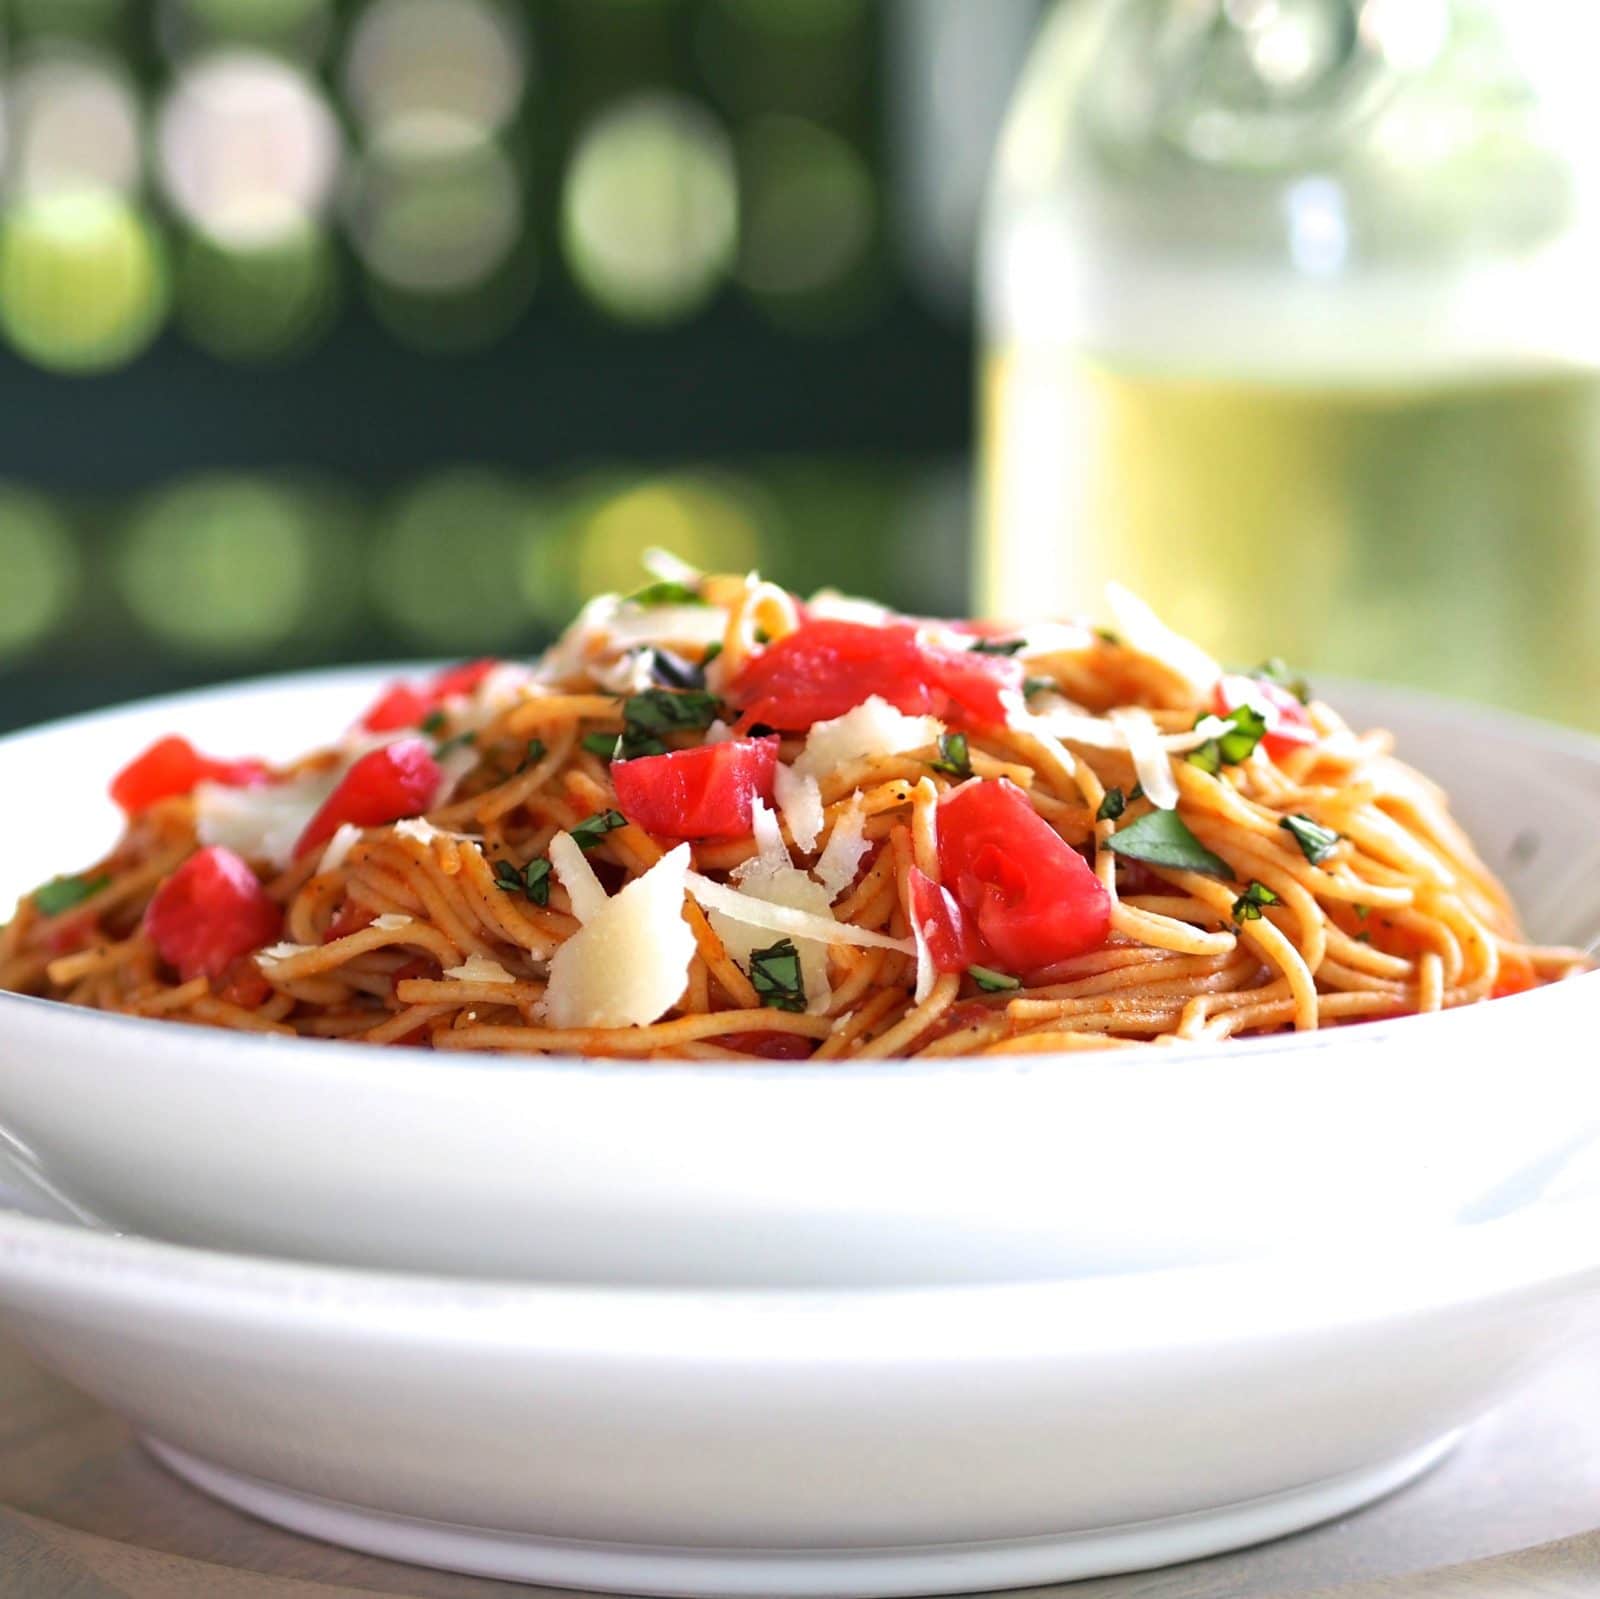 Spaghetti Pomodoro is delicious in its simplicity. Spaghetti, tomatoes, garlic, olive oil, basil and parmesan. simply sated